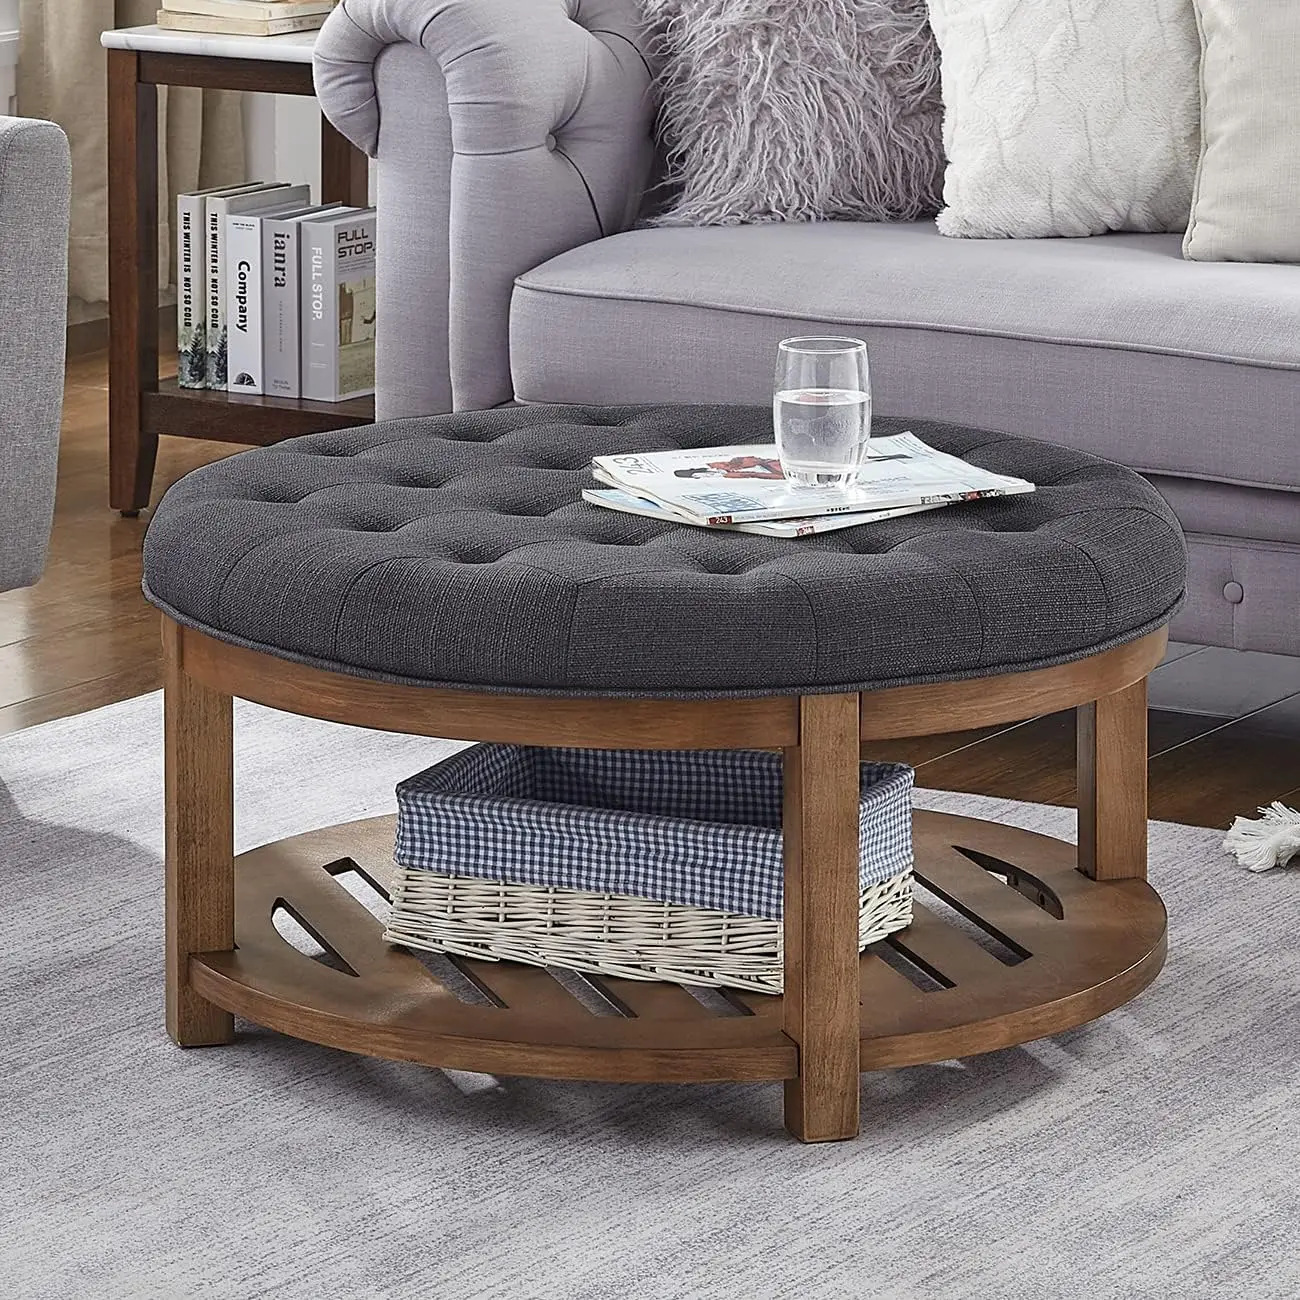 

24KF Large Round Upholstered Tufted Linen Ottoman Coffee Table, Large Footrest Ottoman with Wood Shelf Storage-Charcoal